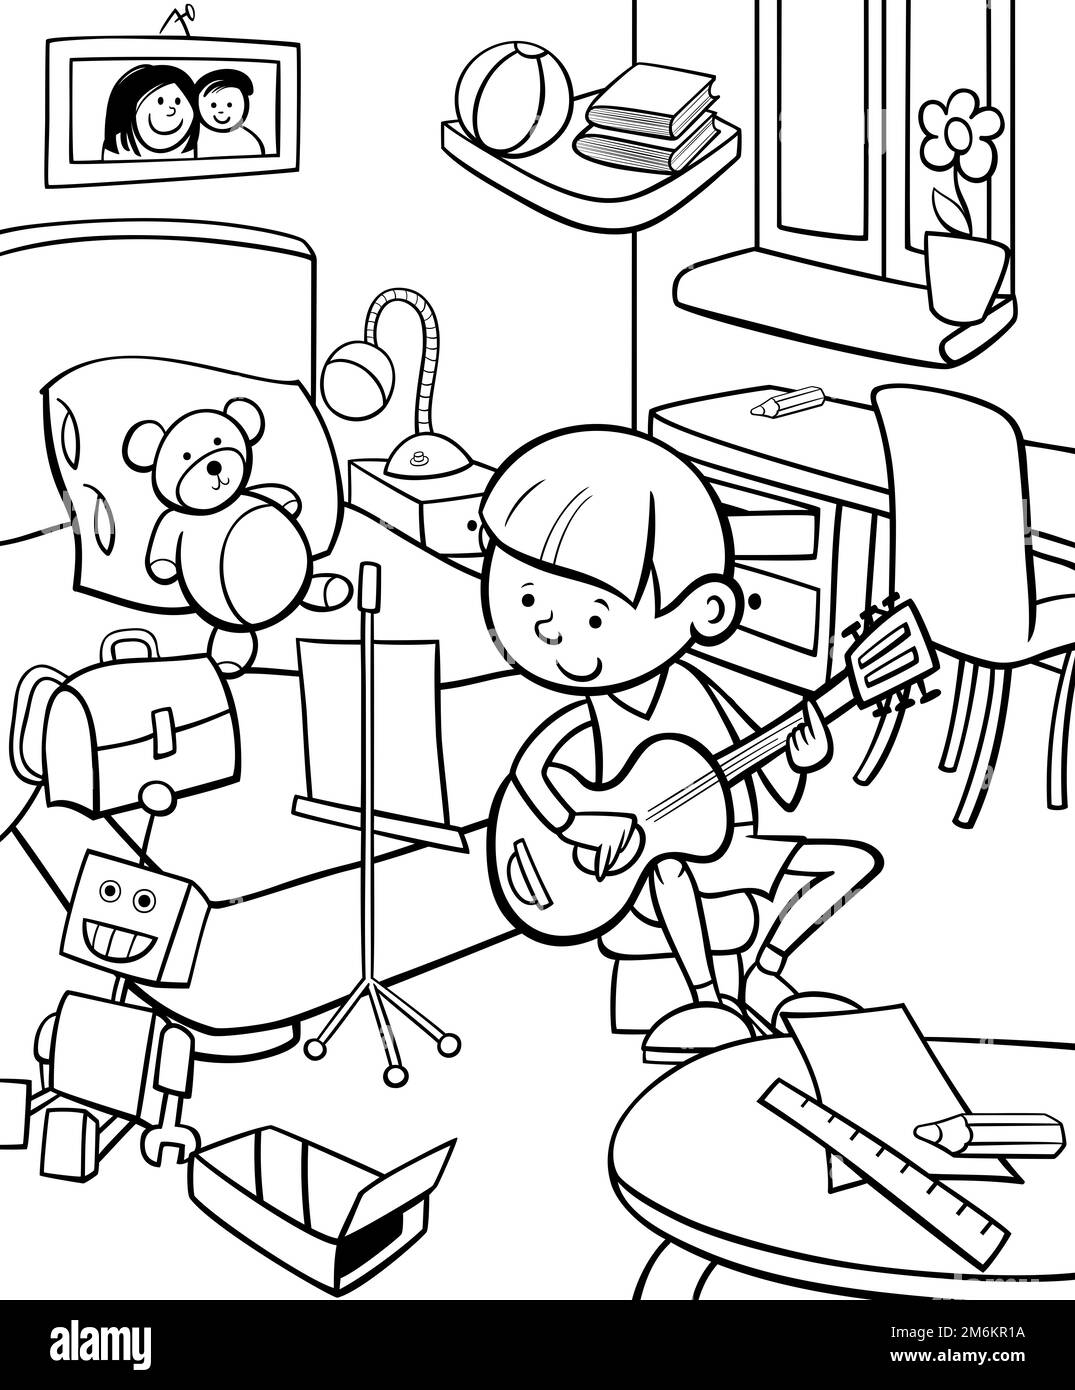 https://c8.alamy.com/comp/2M6KR1A/boy-playing-guitar-in-his-room-cartoon-coloring-page-2M6KR1A.jpg